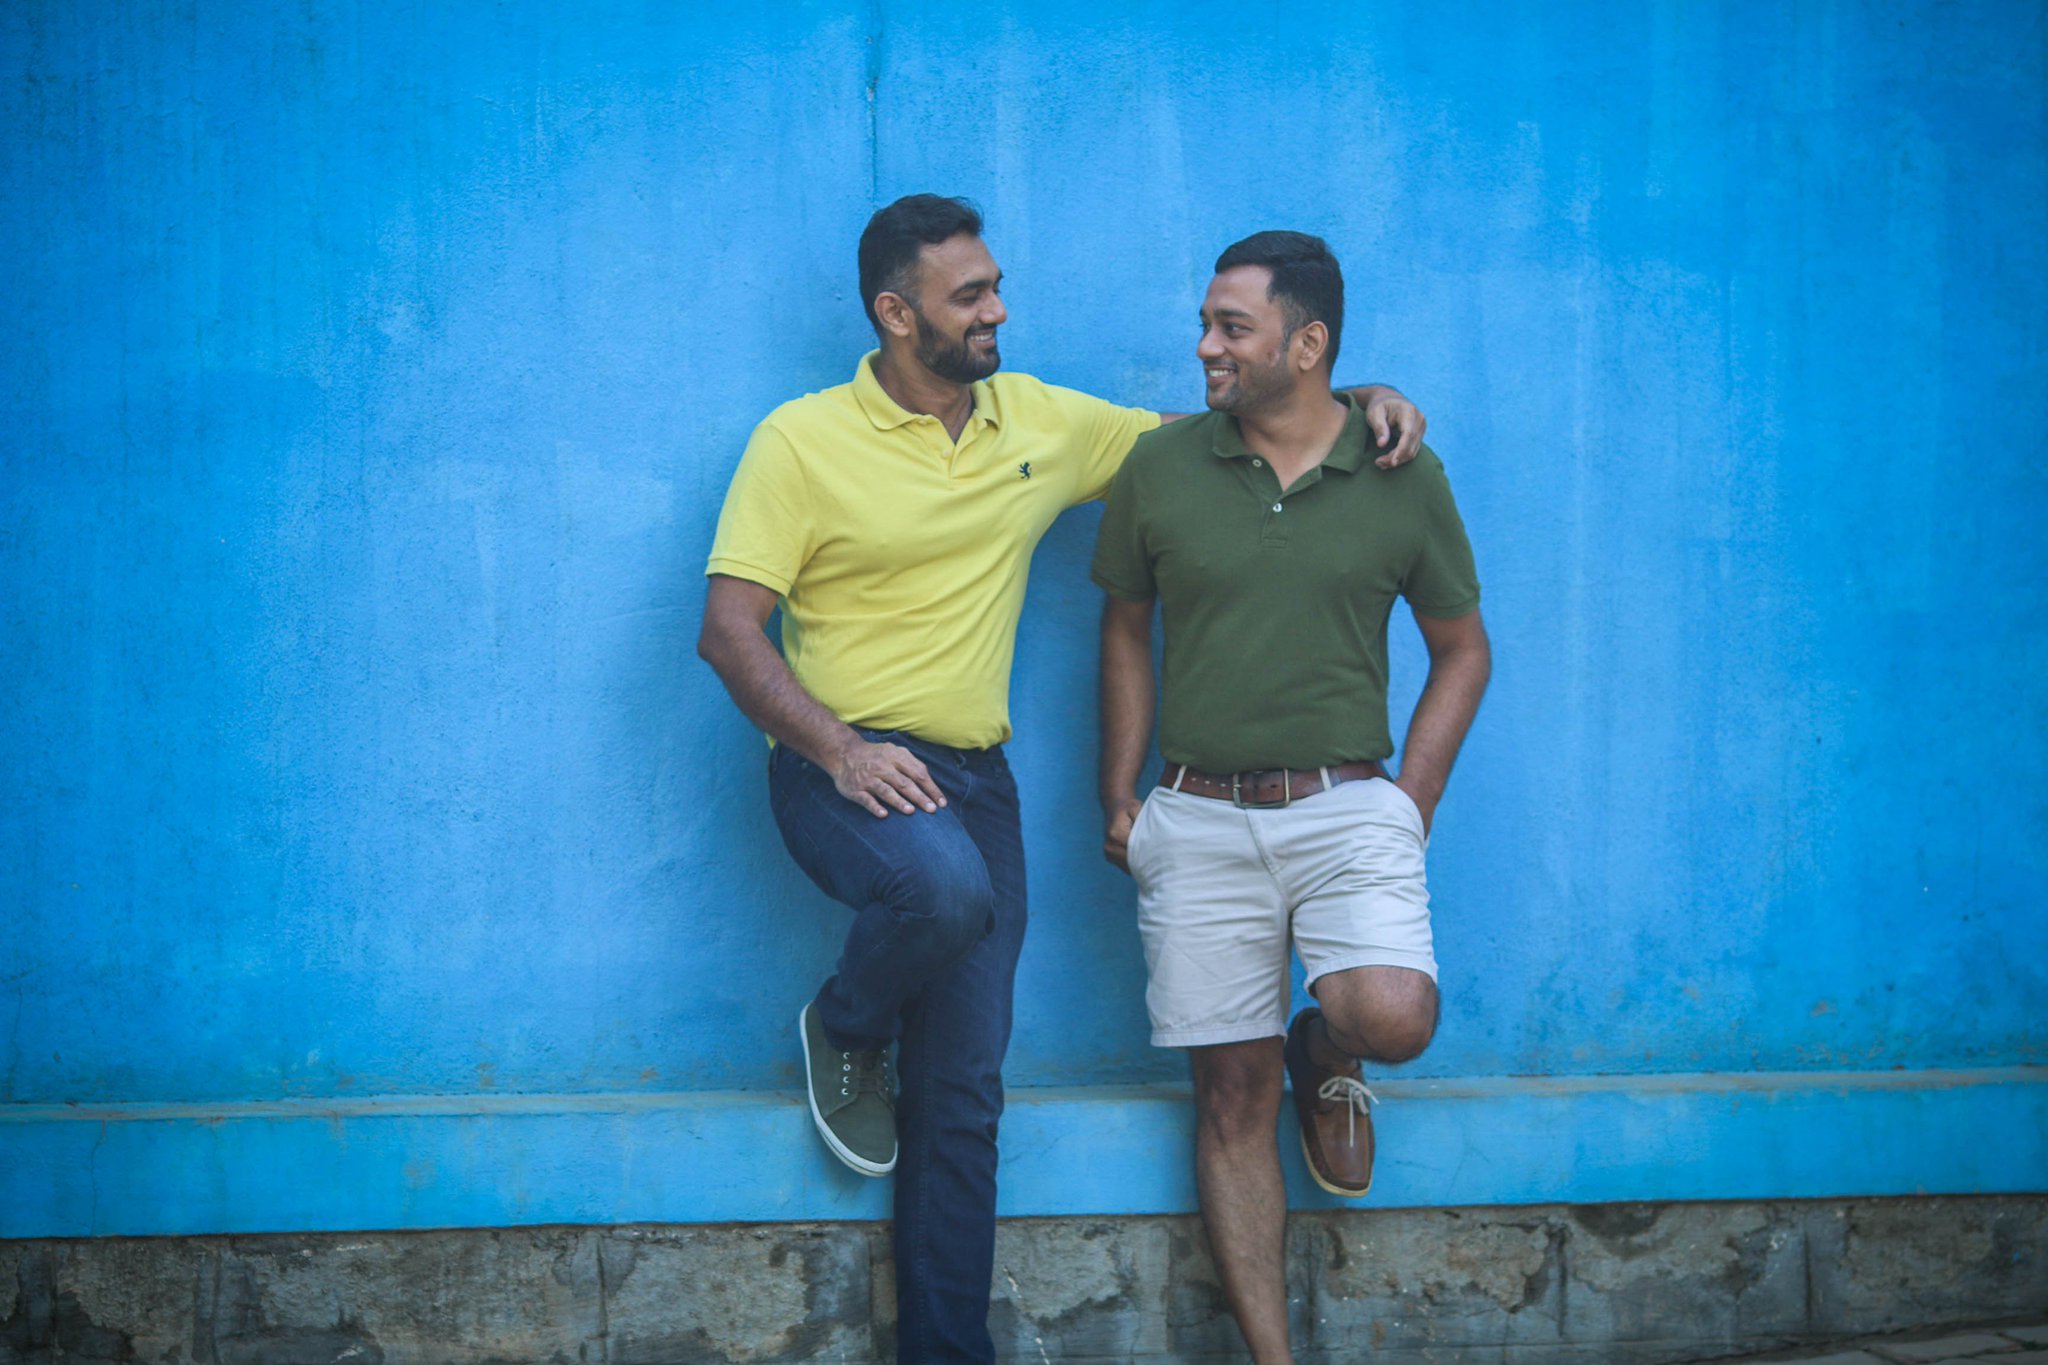 Indian gay couple celebrates their love in candid photo shoot https://t.co/...